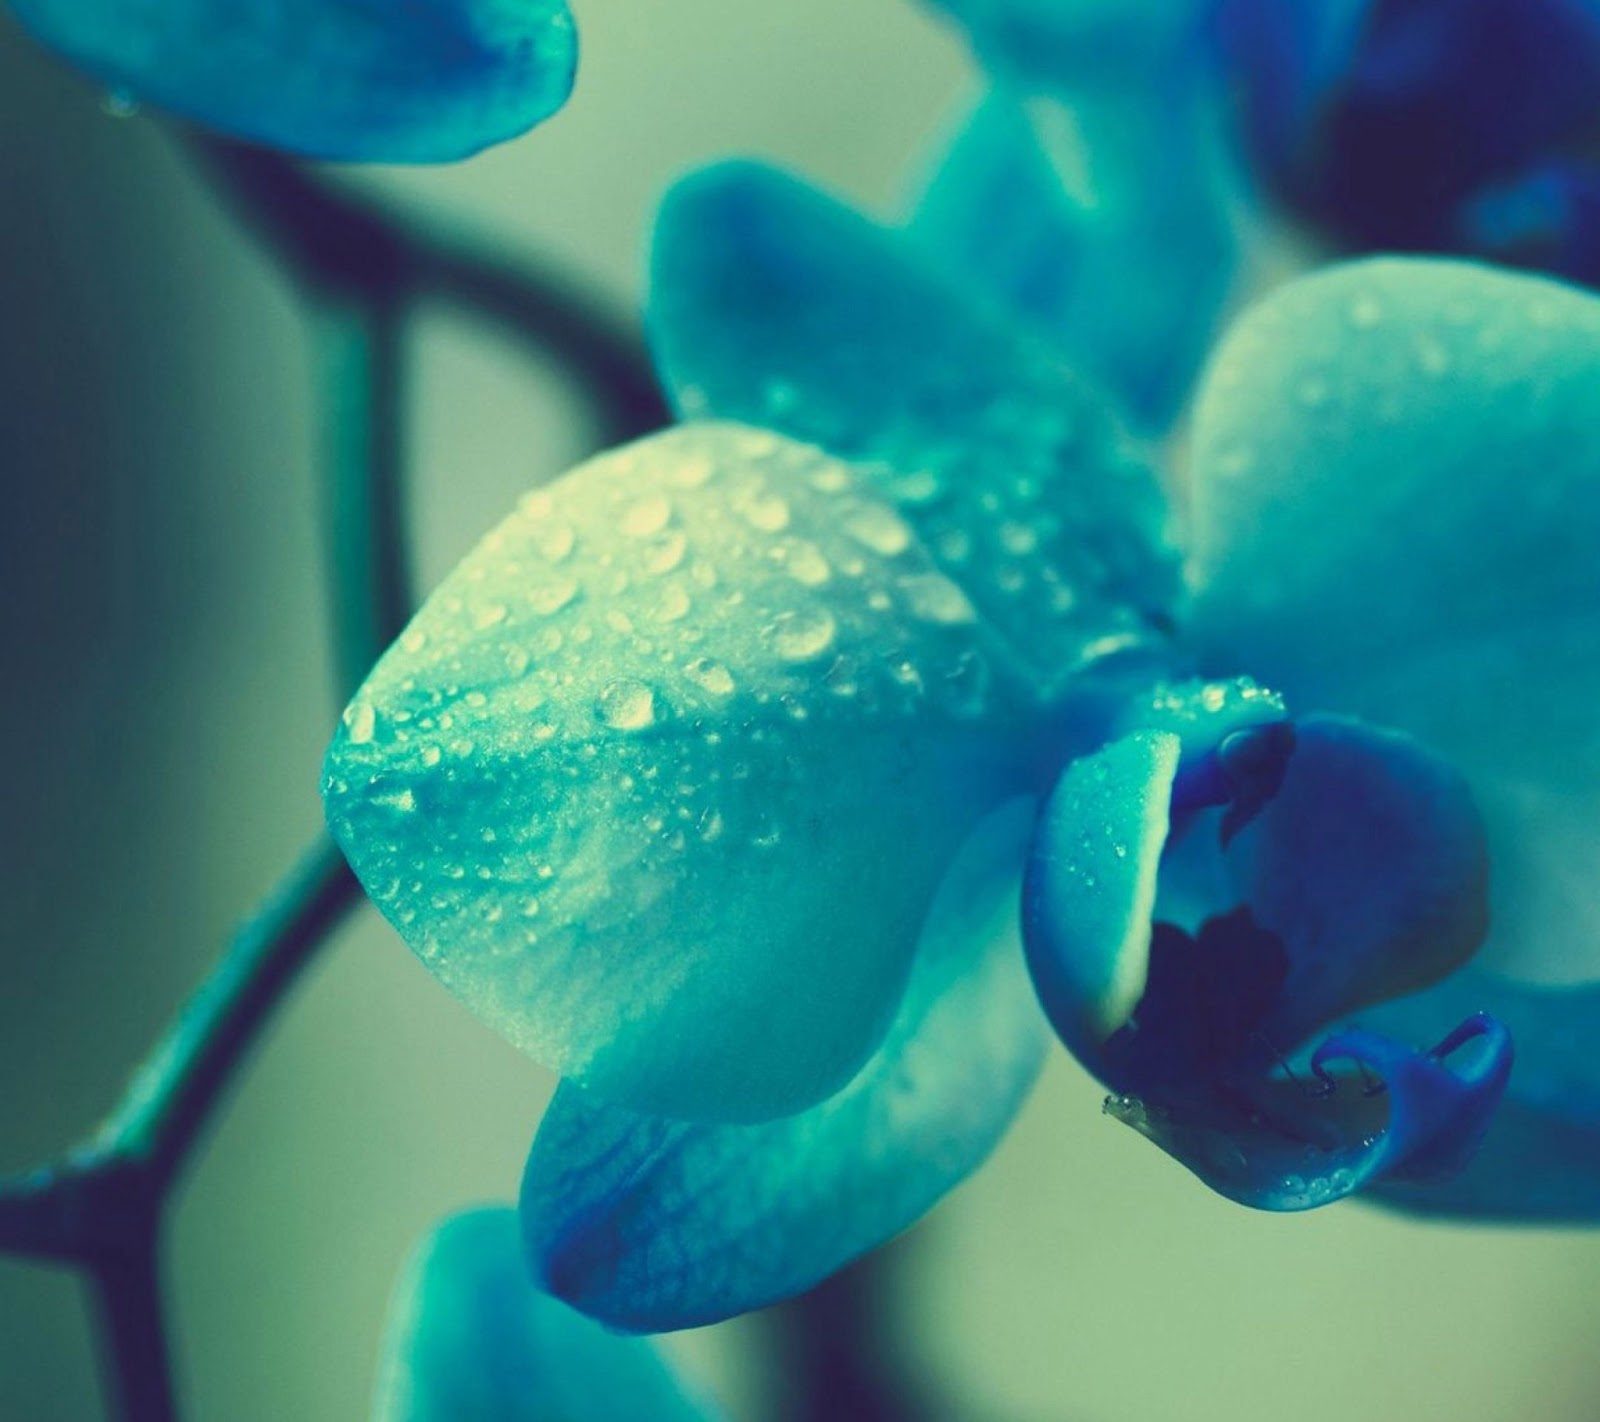 Galaxy S4 Wallpaper - Blue Flower - HD Wallpapers - 9to5Wallpapers